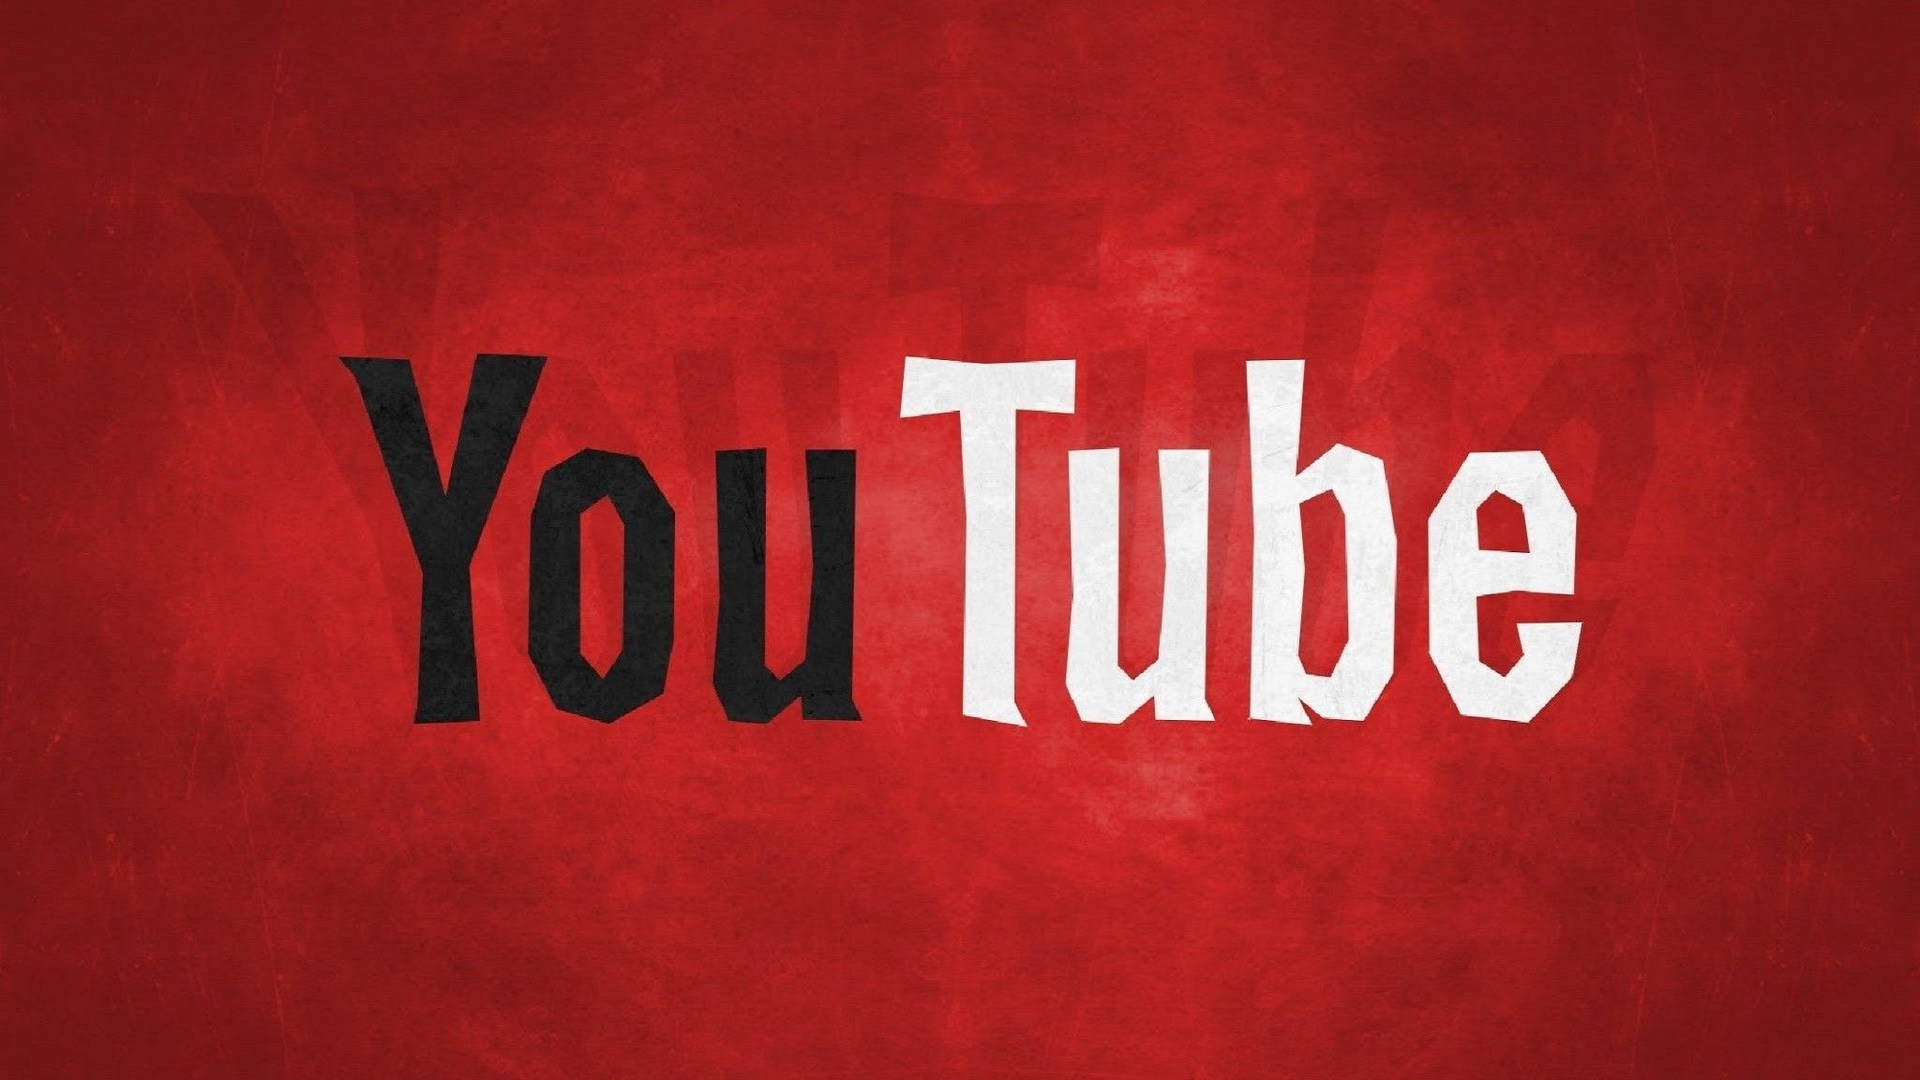 Youtube Red Banner Background